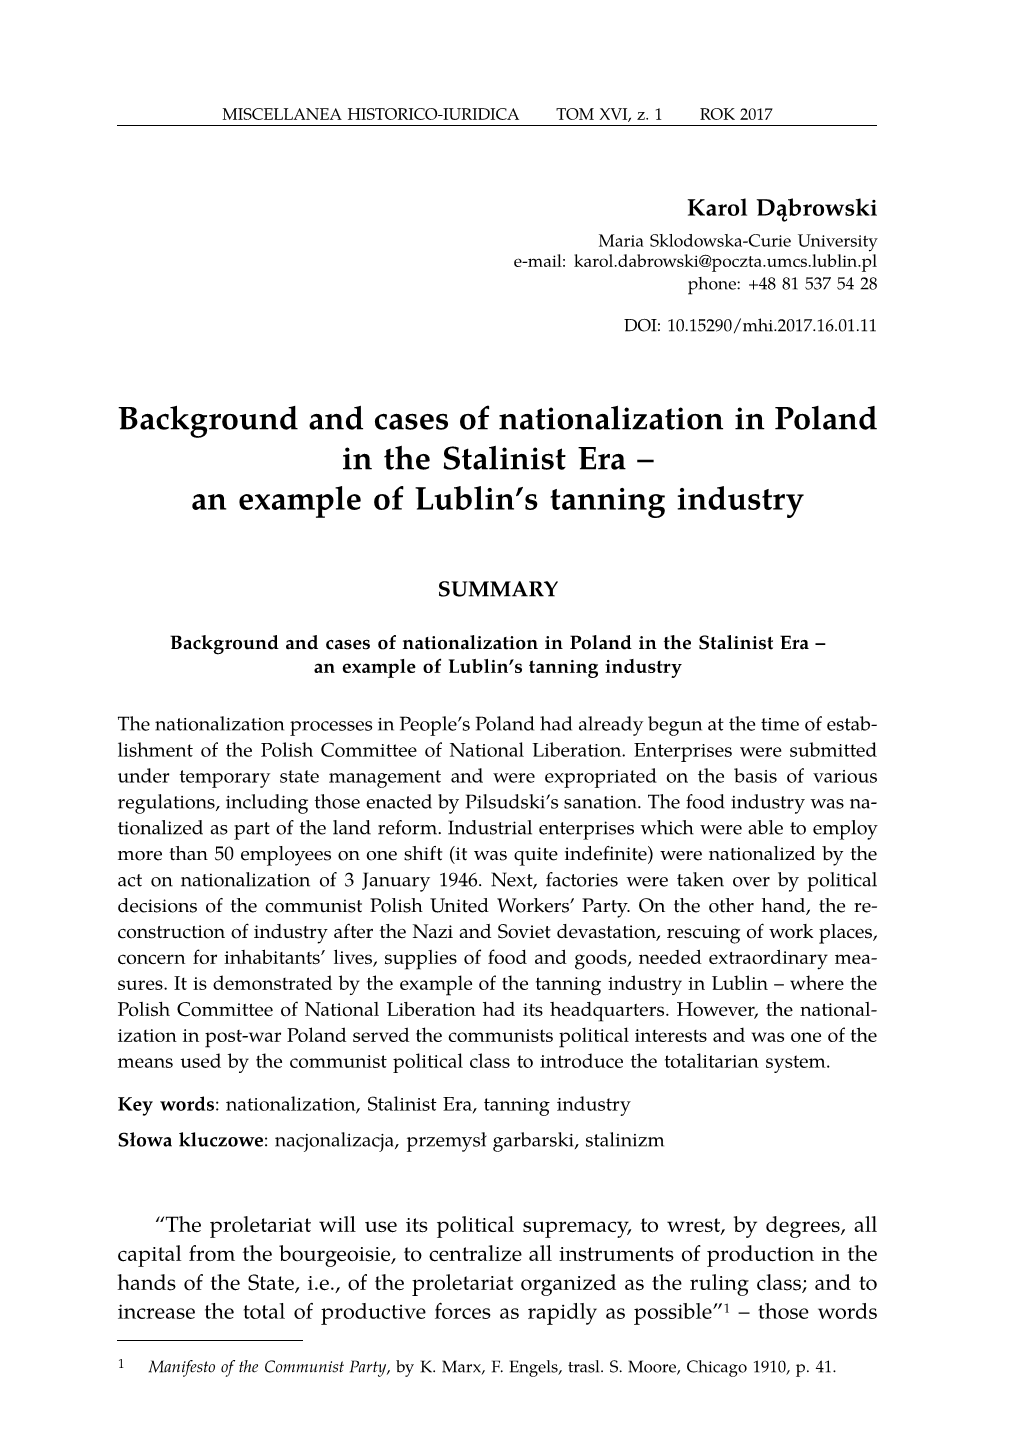 Background and Cases of Nationalization in Poland in the Stalinist Era – an Example of Lublin’S Tanning Industry